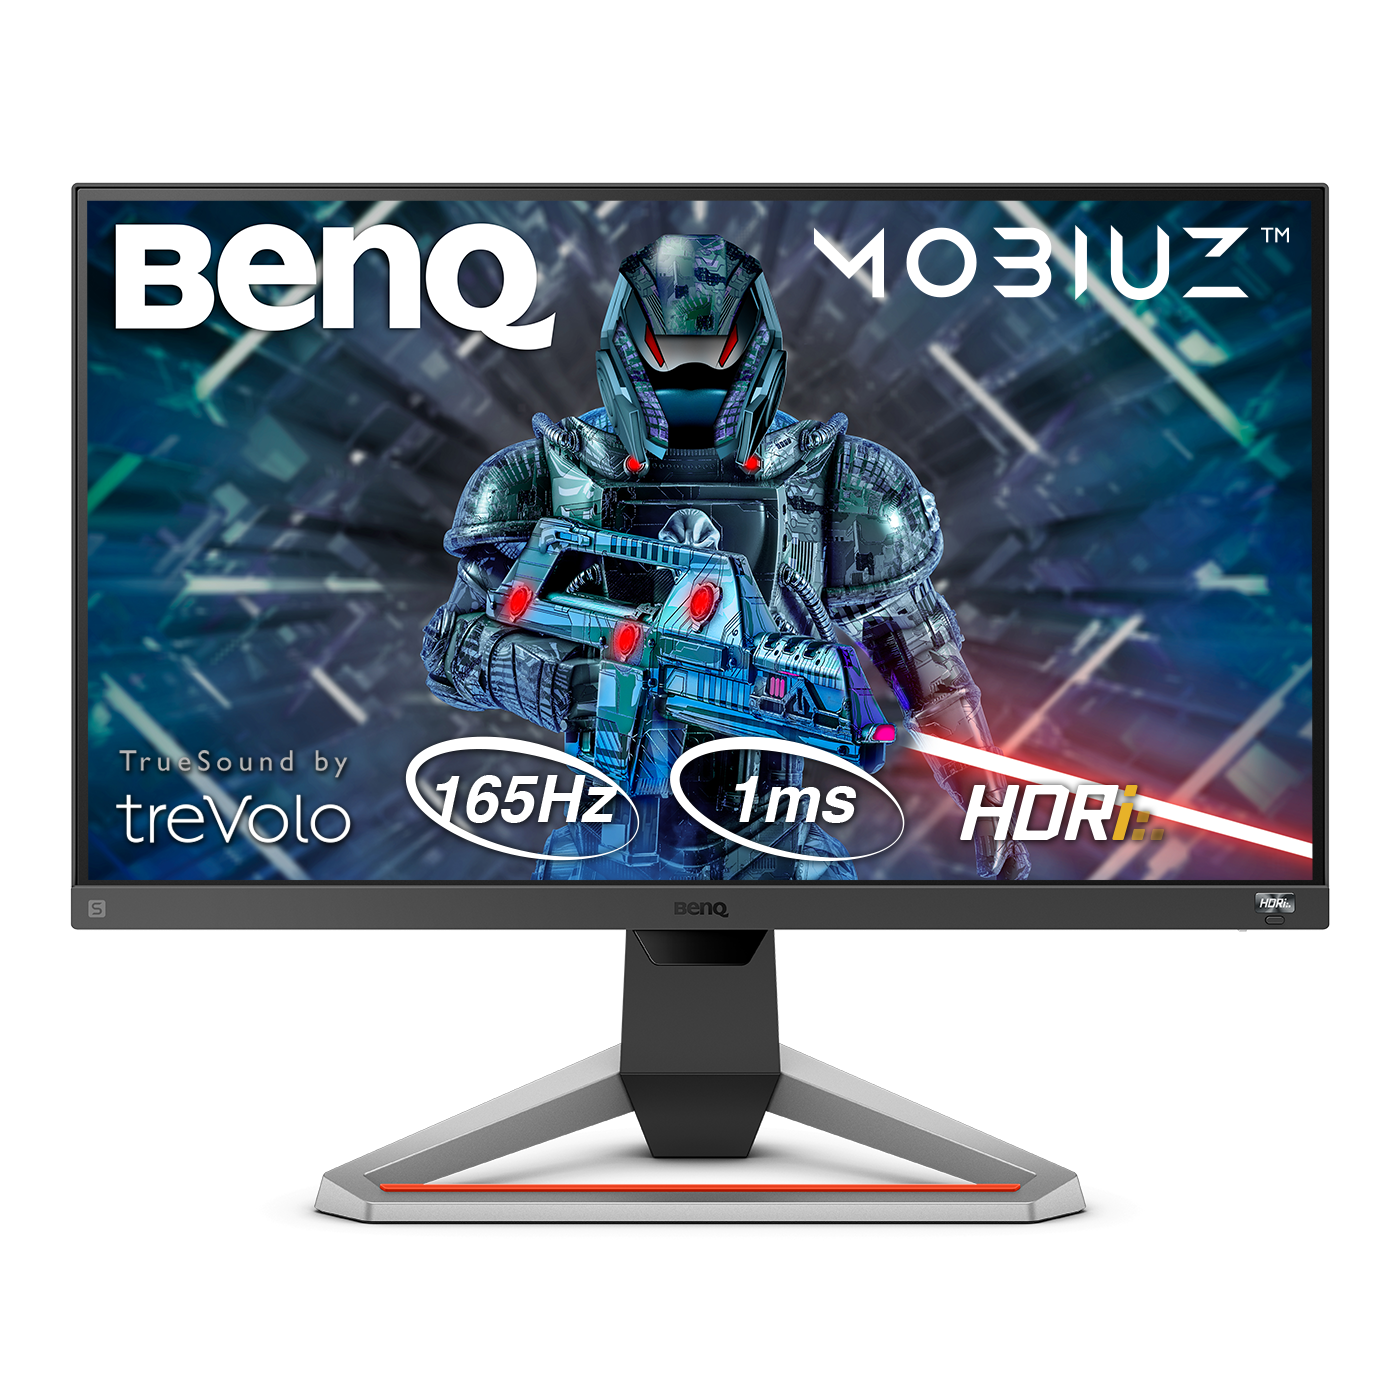 Picture of the BenQ MOBIUZ EX2510S monitor.